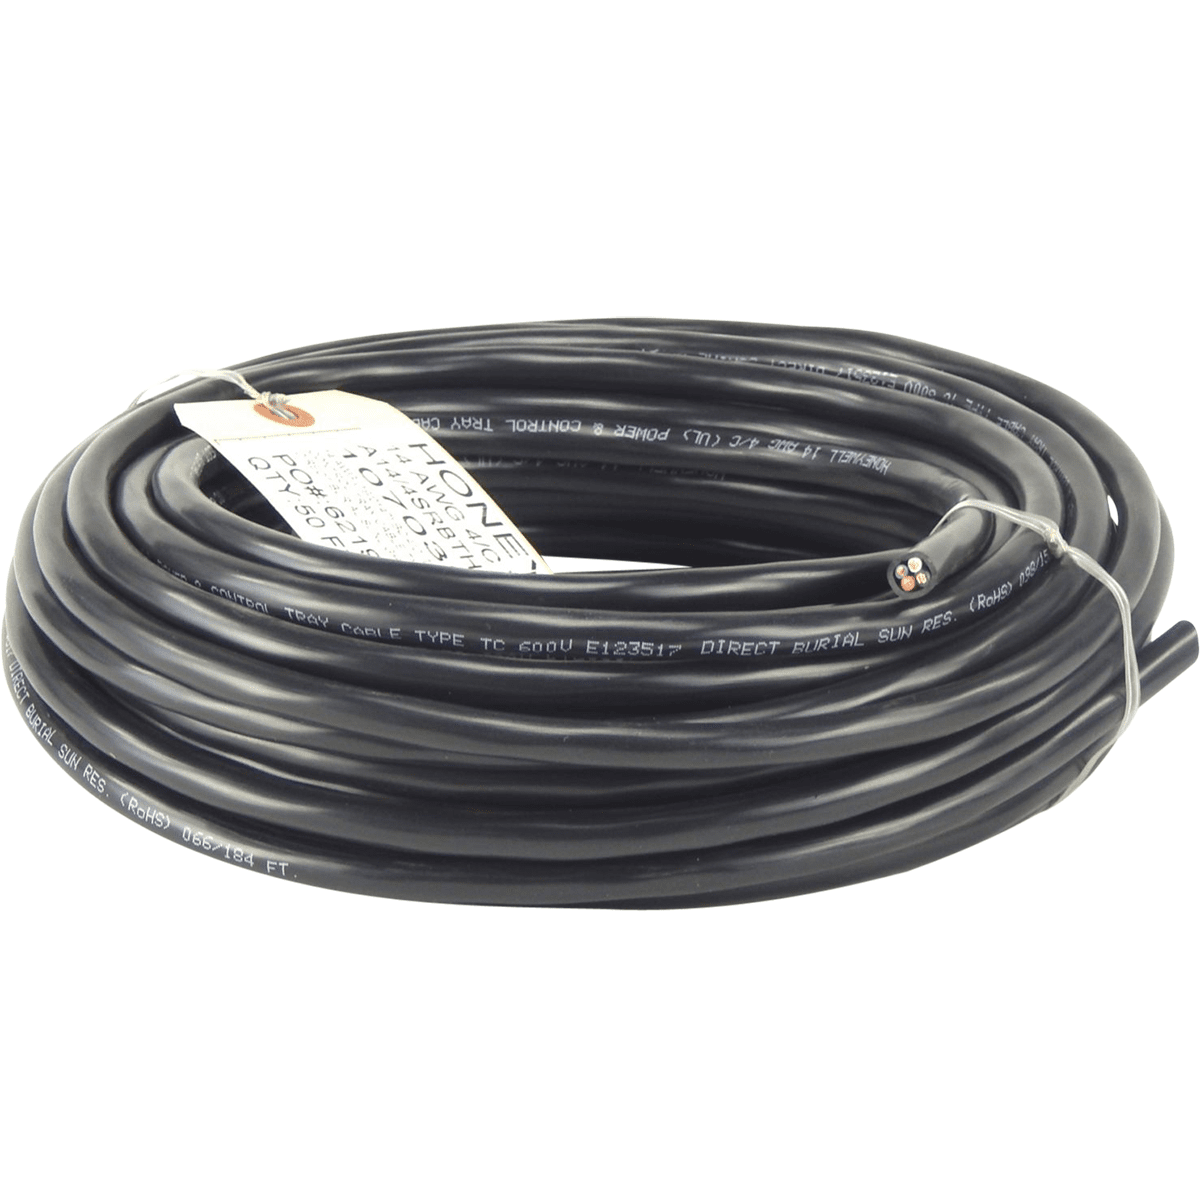 "1/4"""" x 1/4"""" 50 Ft Stranded Tray Cable Wire"